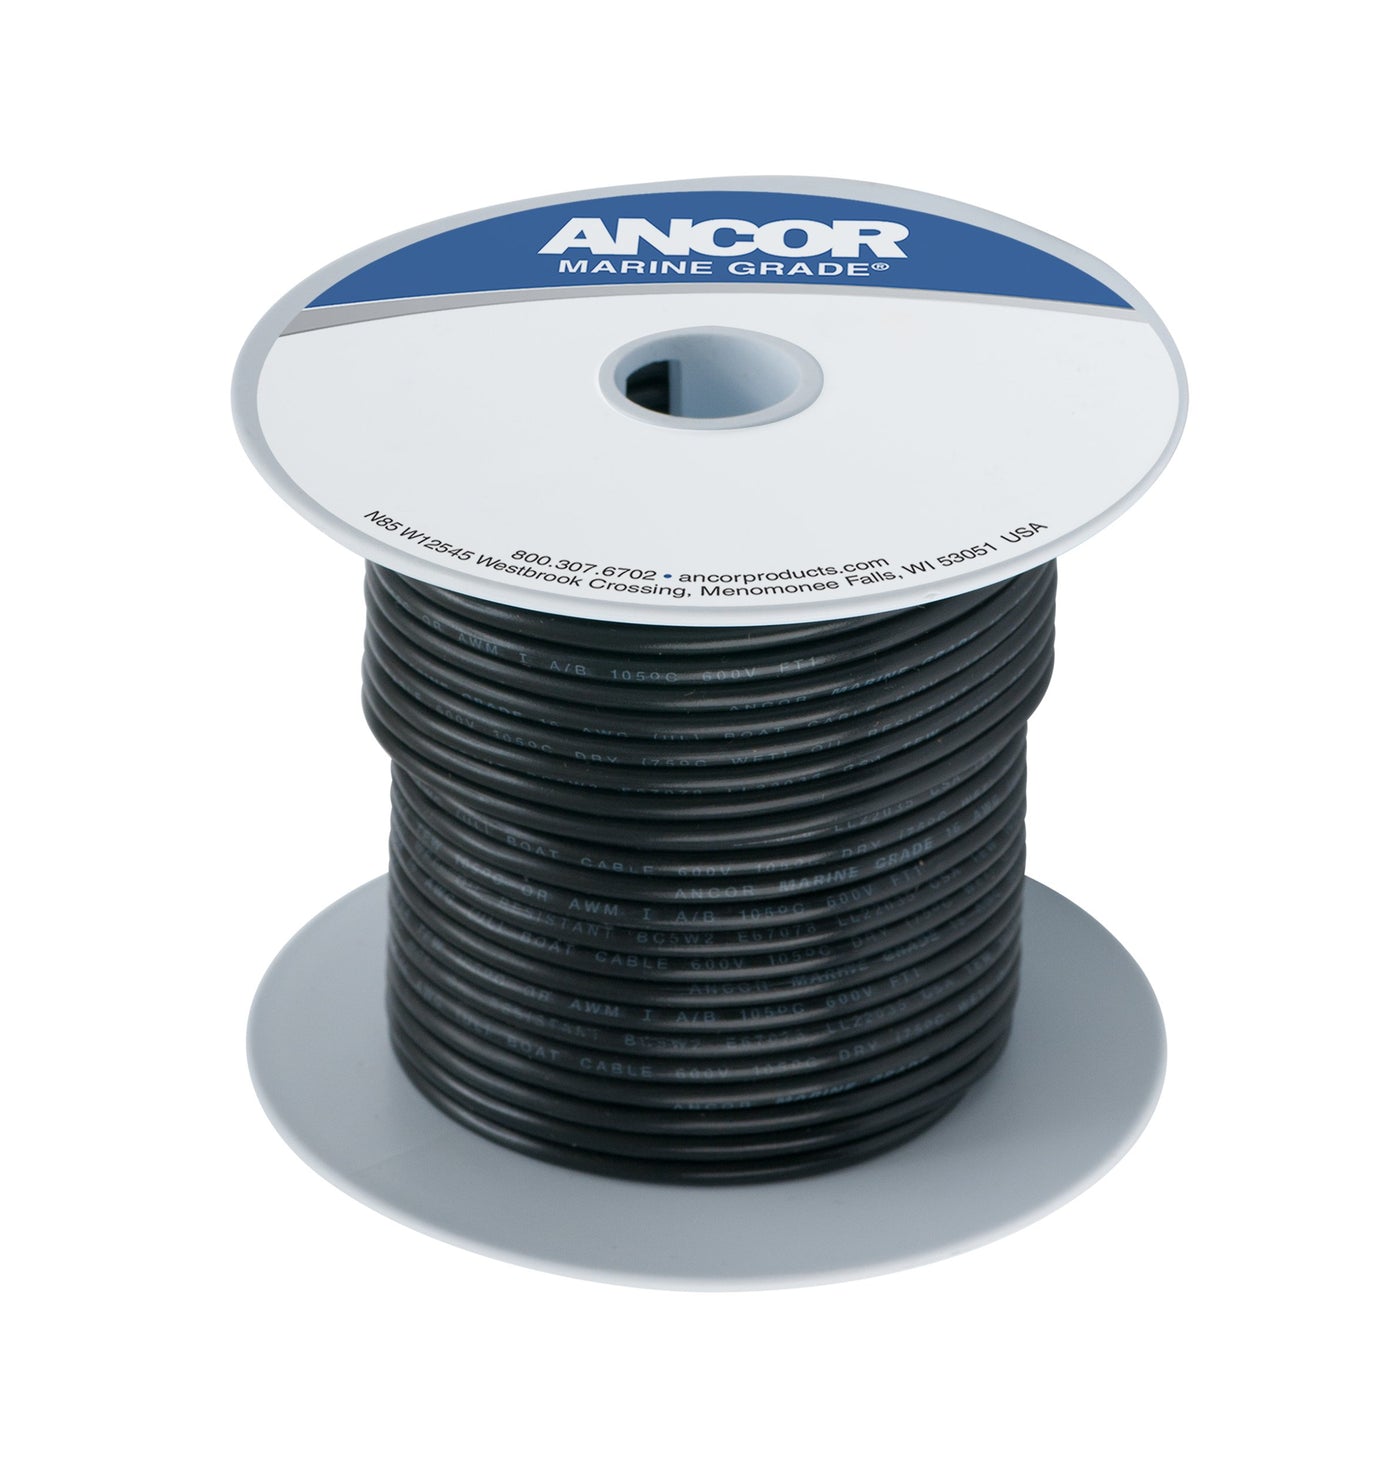 Ancor 111025 Tinned Copper Wire, 8 AWG (8mm²), Black - 250ft